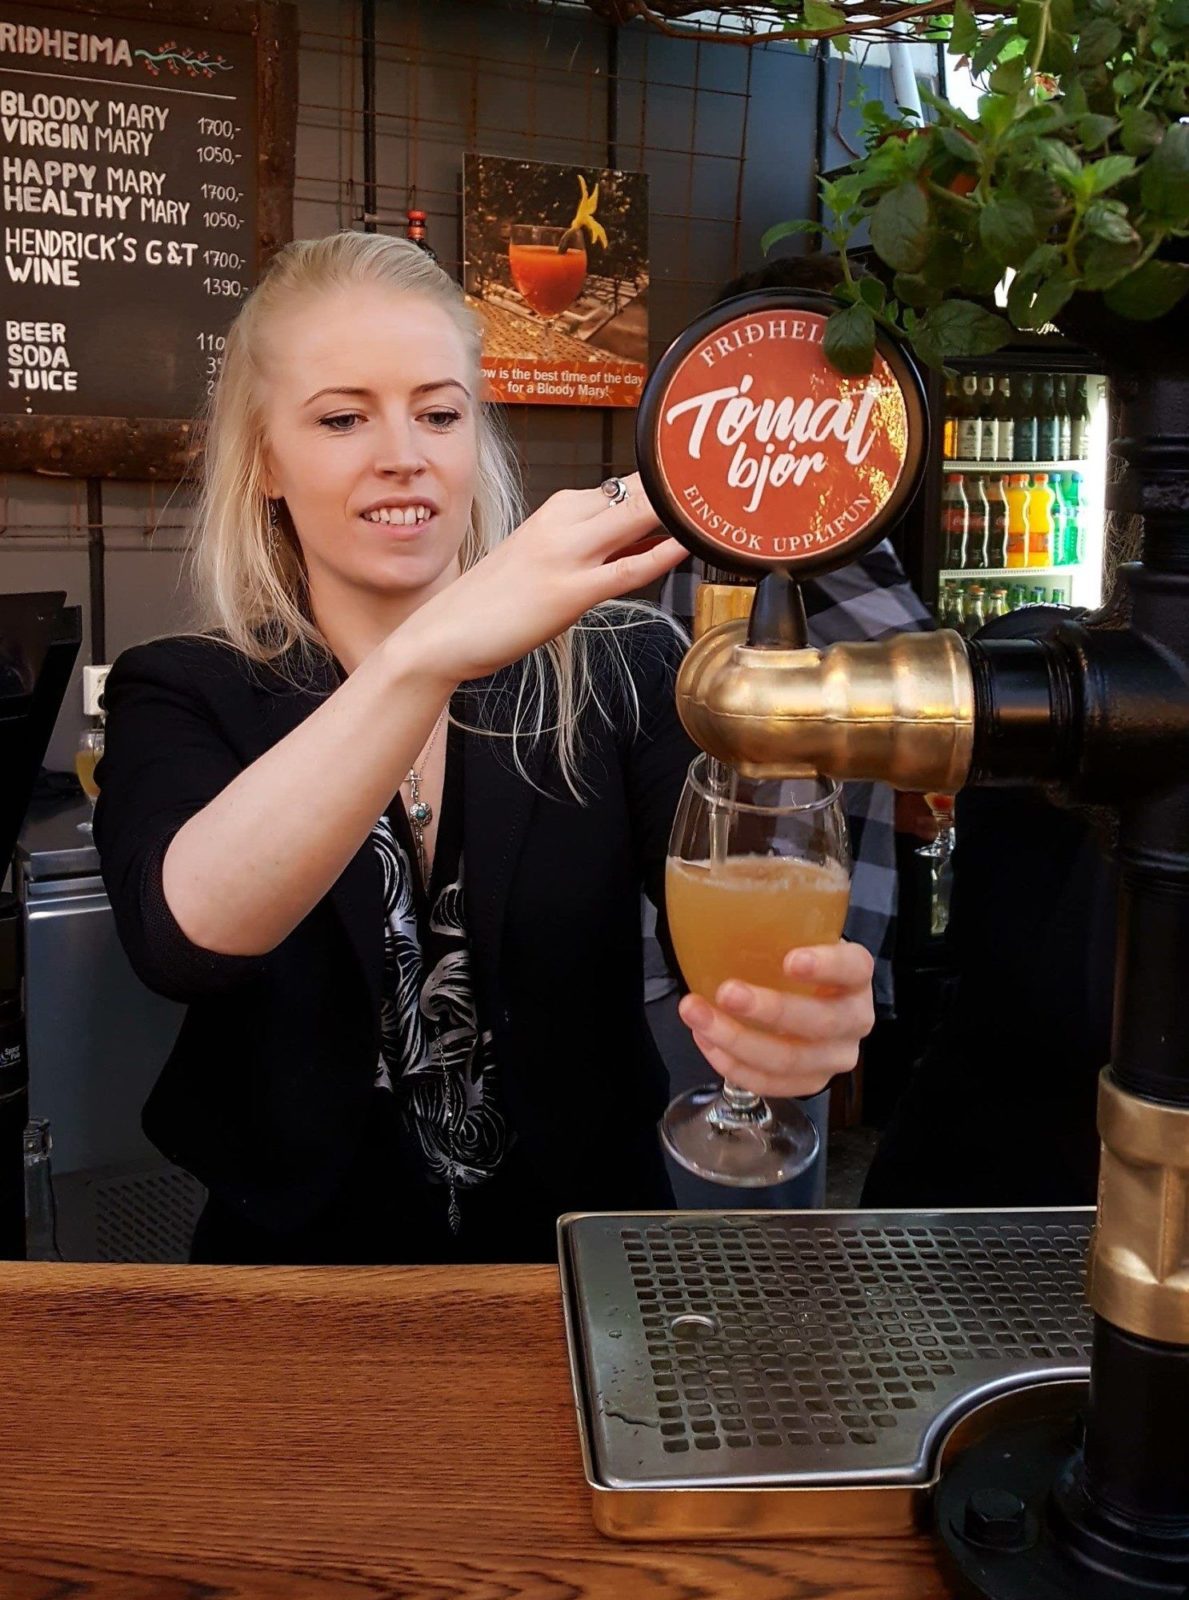 A woman pours tomato beer at Friðheimar restaurant which is on the Golden Circle in Iceland.